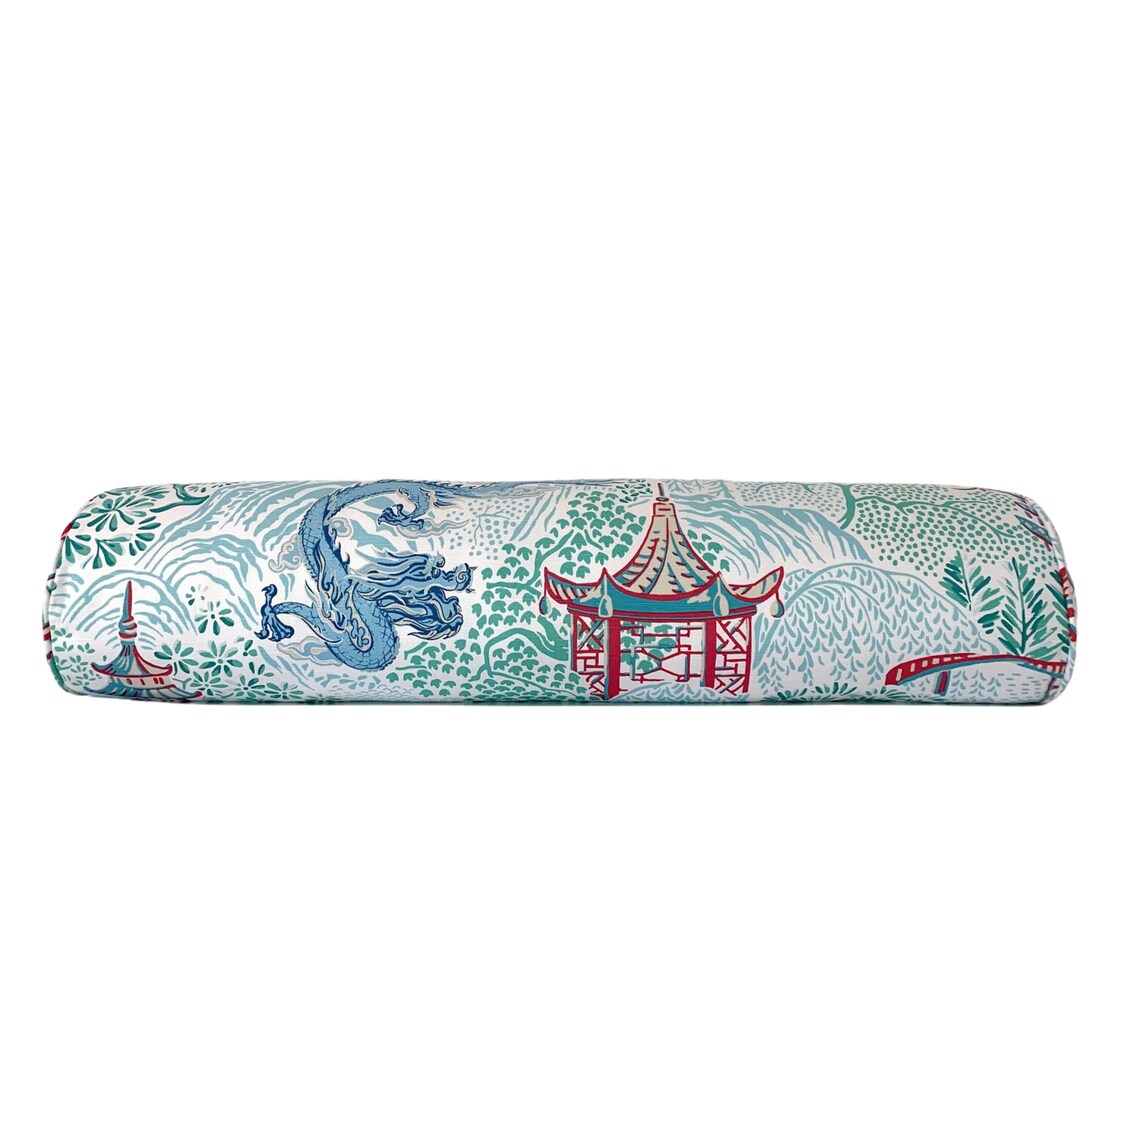 Vern Yip Pagodas Dragon Chinoiserie Pillow Cover in Aqua - Available in Throw, Lumbar, Bolster, Euro Sizes